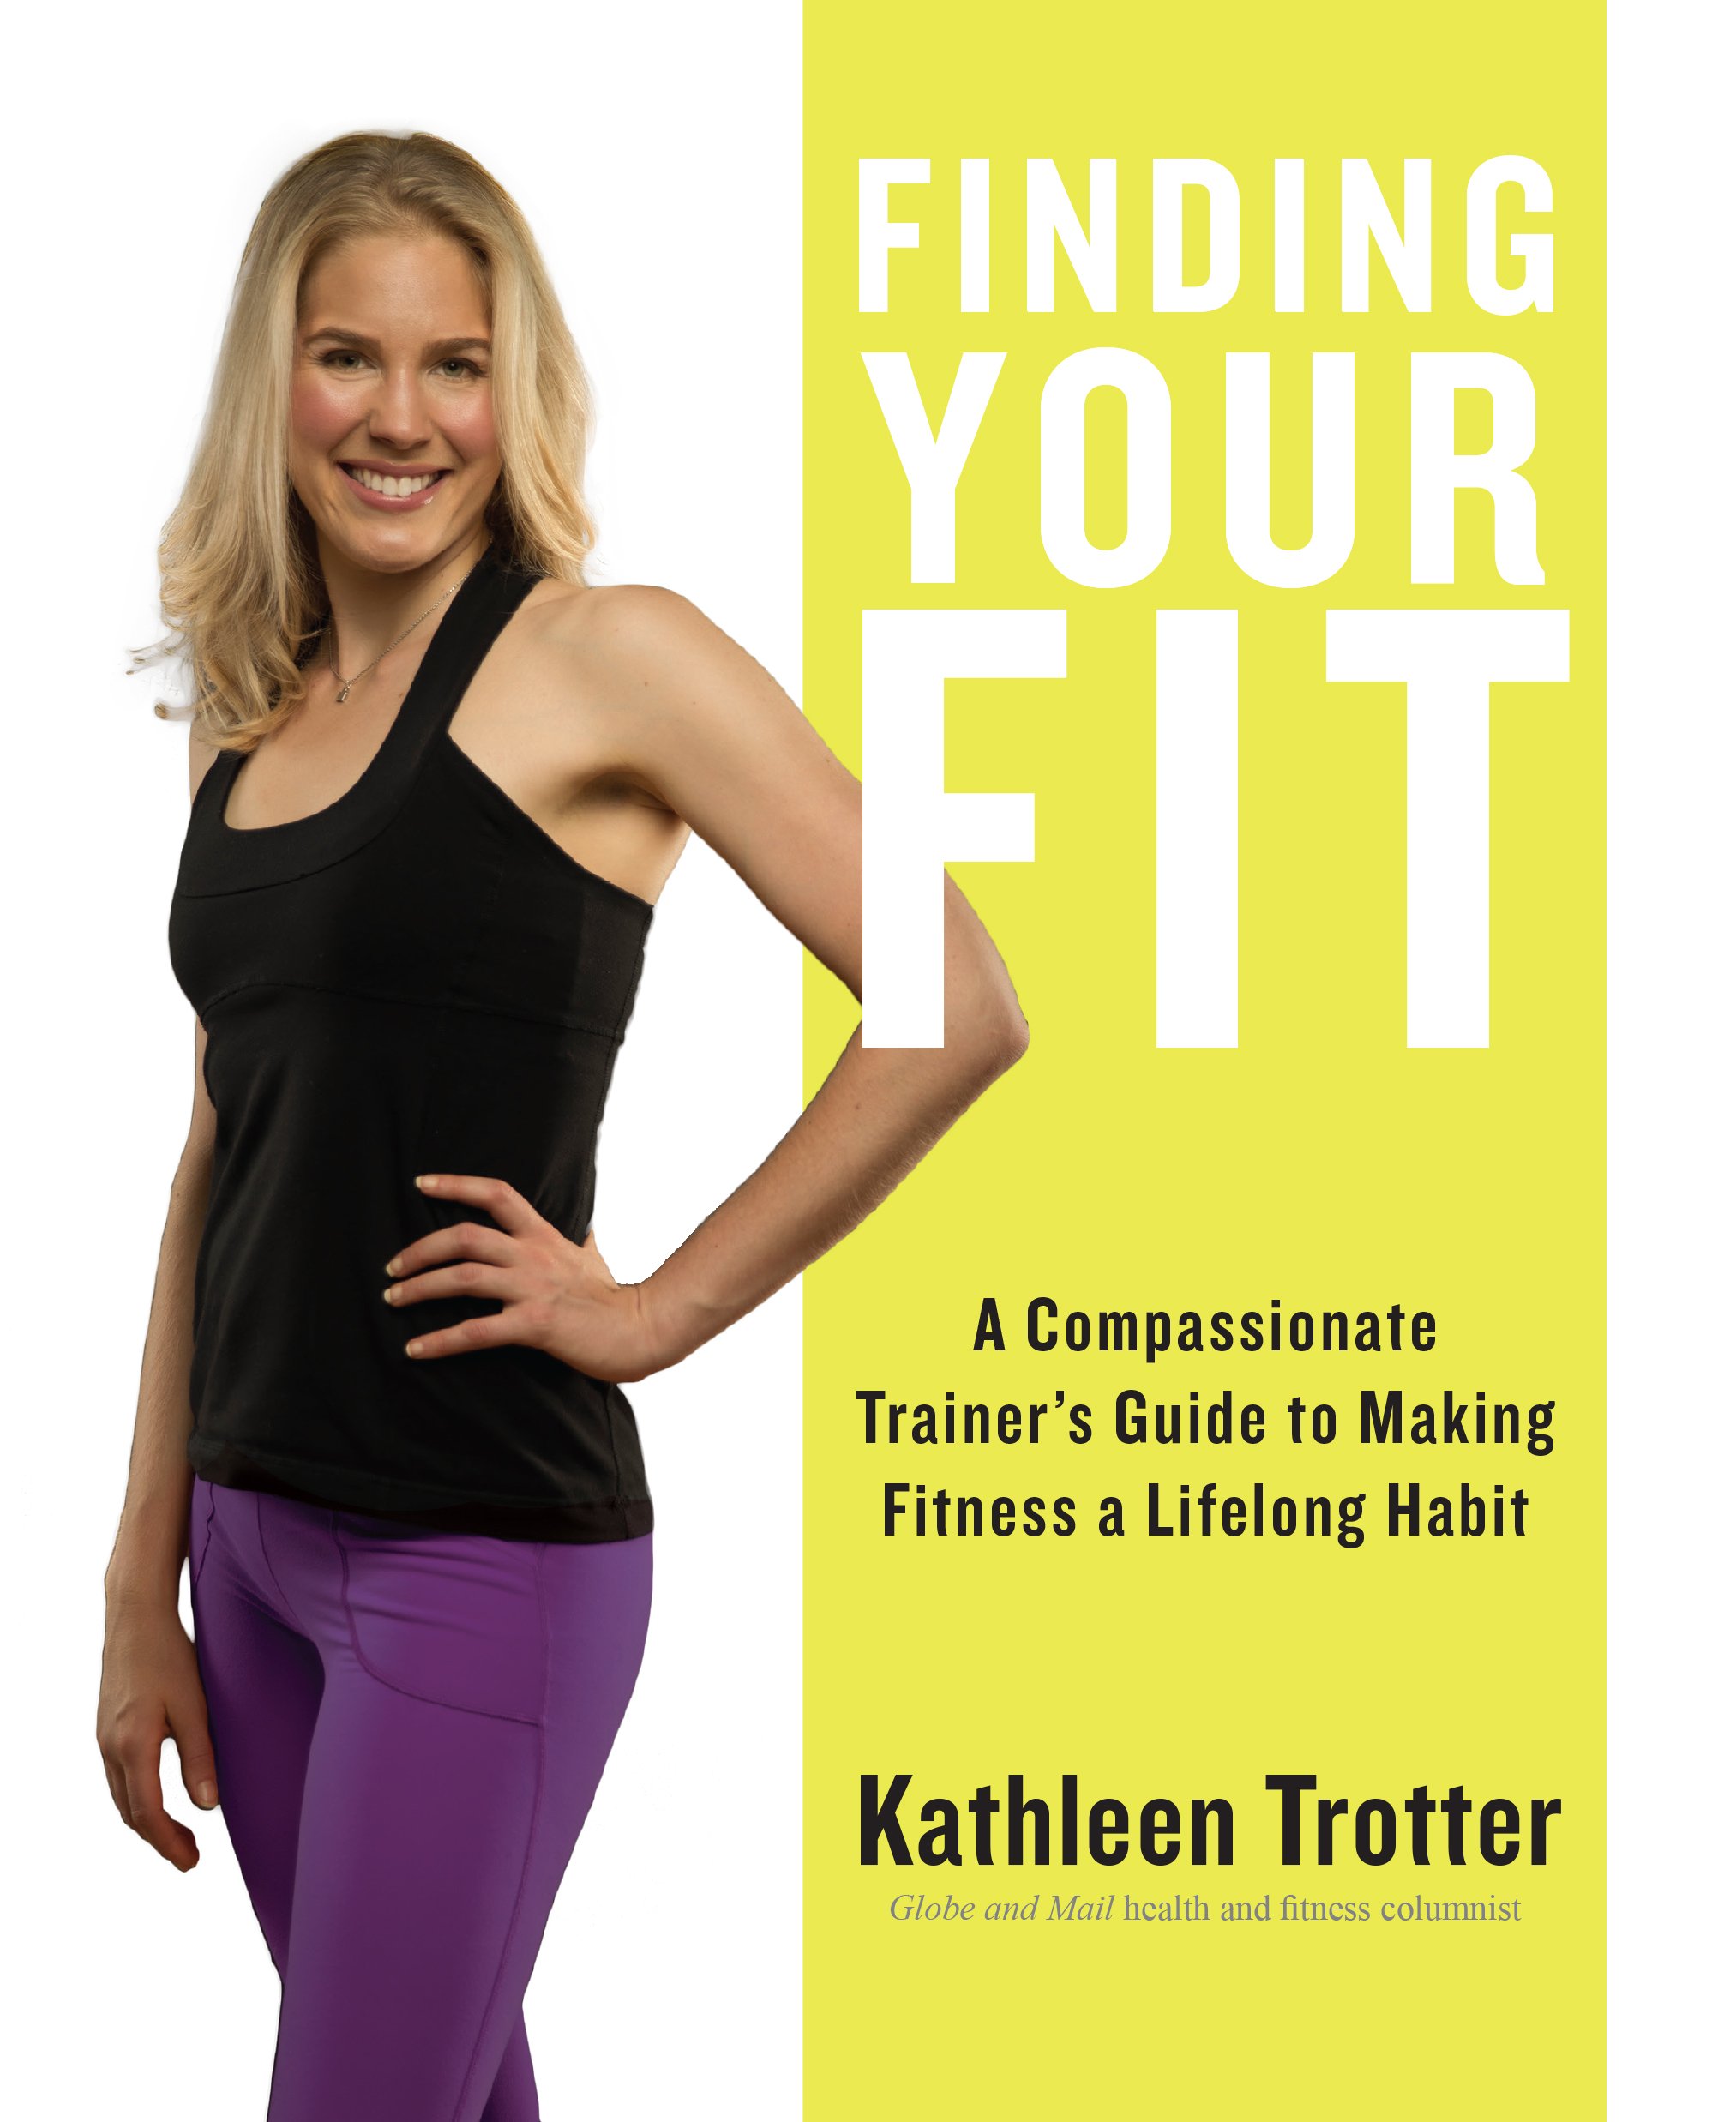 Xxx Bf Vies Does Mp3 Dotes - Finding Your Fit: A Compassionate Trainer's Guide to Making Fitness a  Lifelong Habit - Kathleen Trotterâ€“Personal trainer, author, speaker